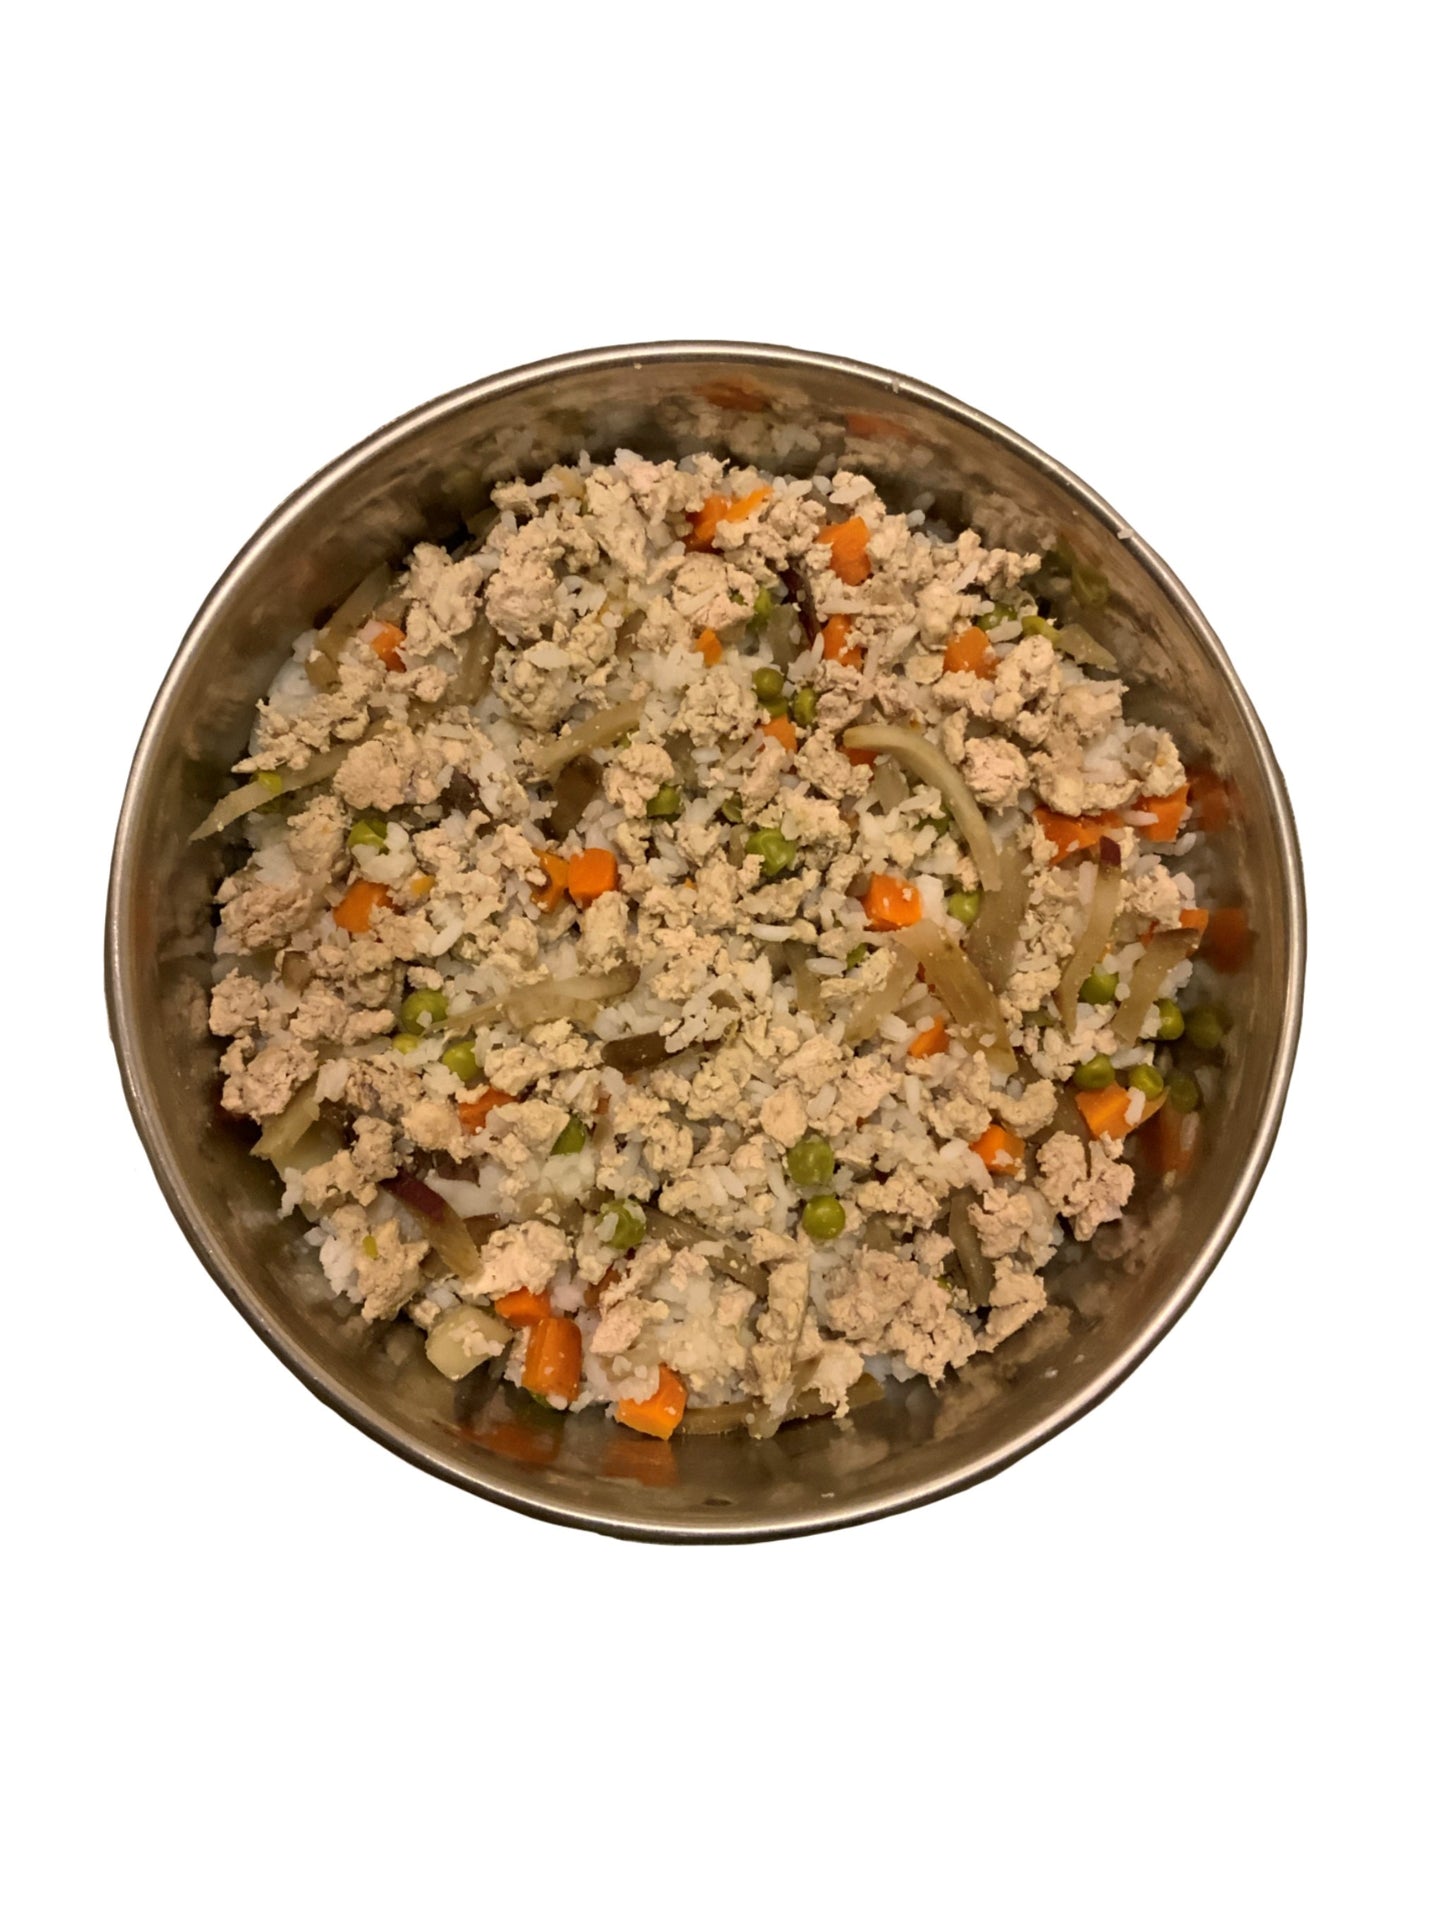 Chicken, Vegetables & White Rice - Gently Cooked Dog Food.